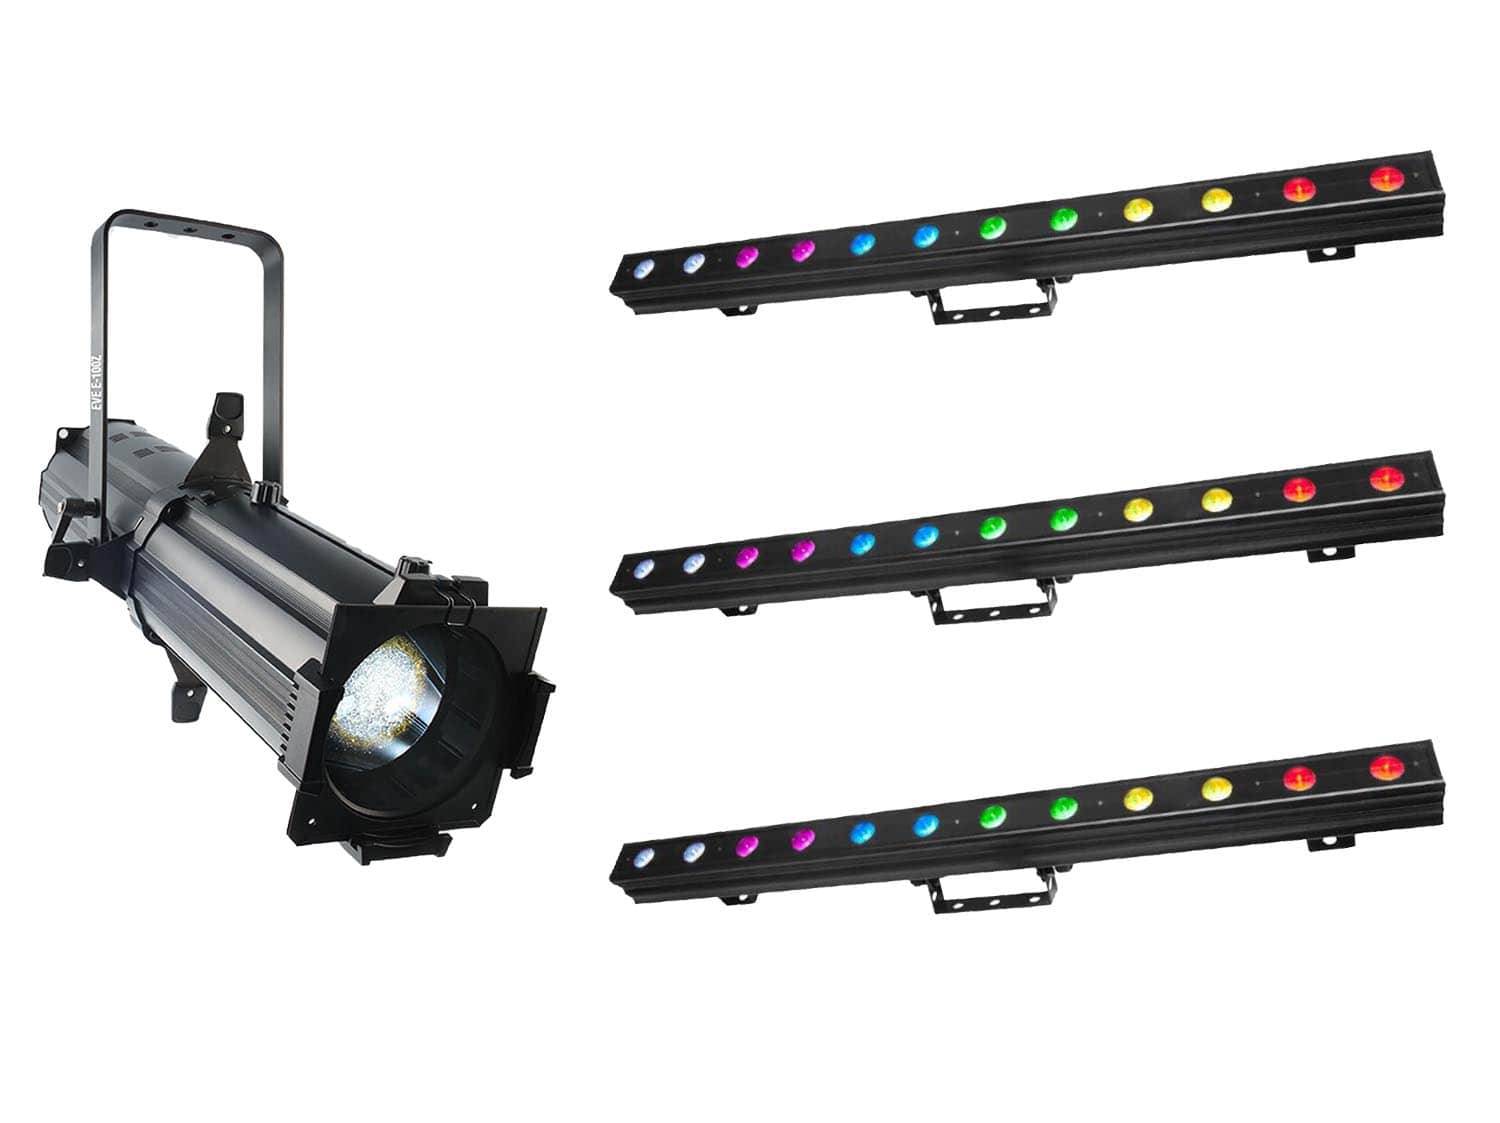 Chauvet DJ Lighting Package for Theater and Comedy Club - Hollywood DJ